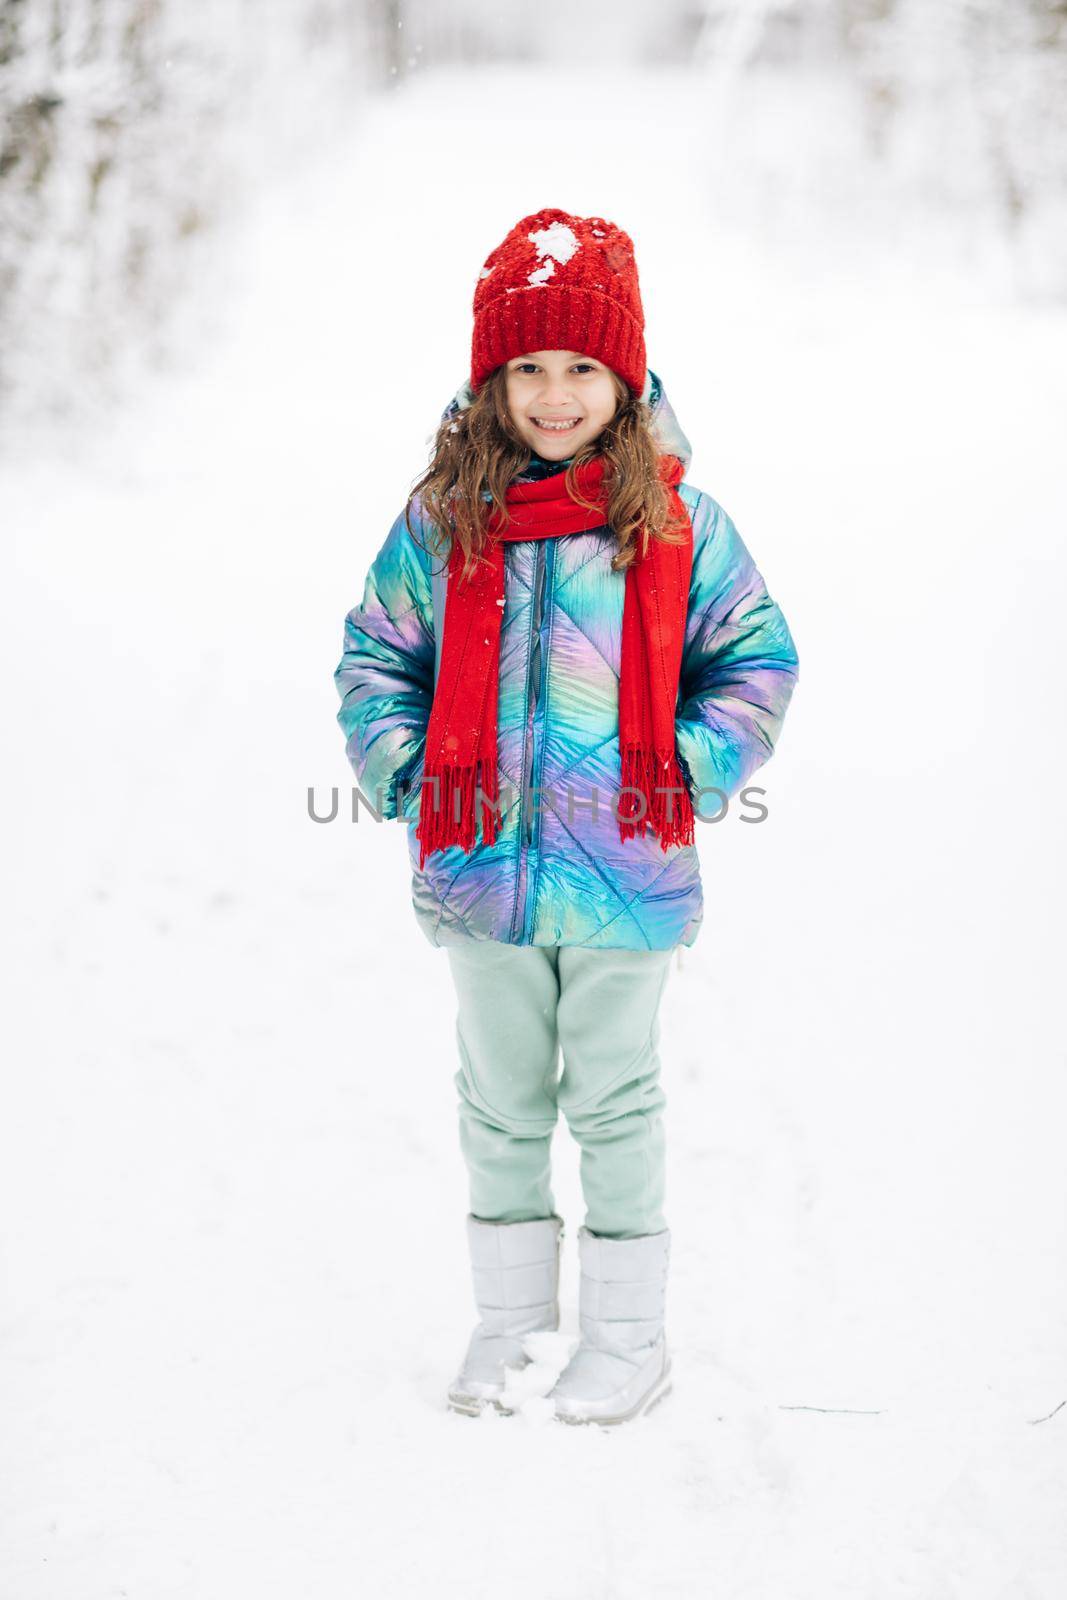 Portrait Little Child Girl Smiling Looking at Camera Standing into Park Outdoor. Winter time, happiness concept. Snowing weather. Carefree childhood.